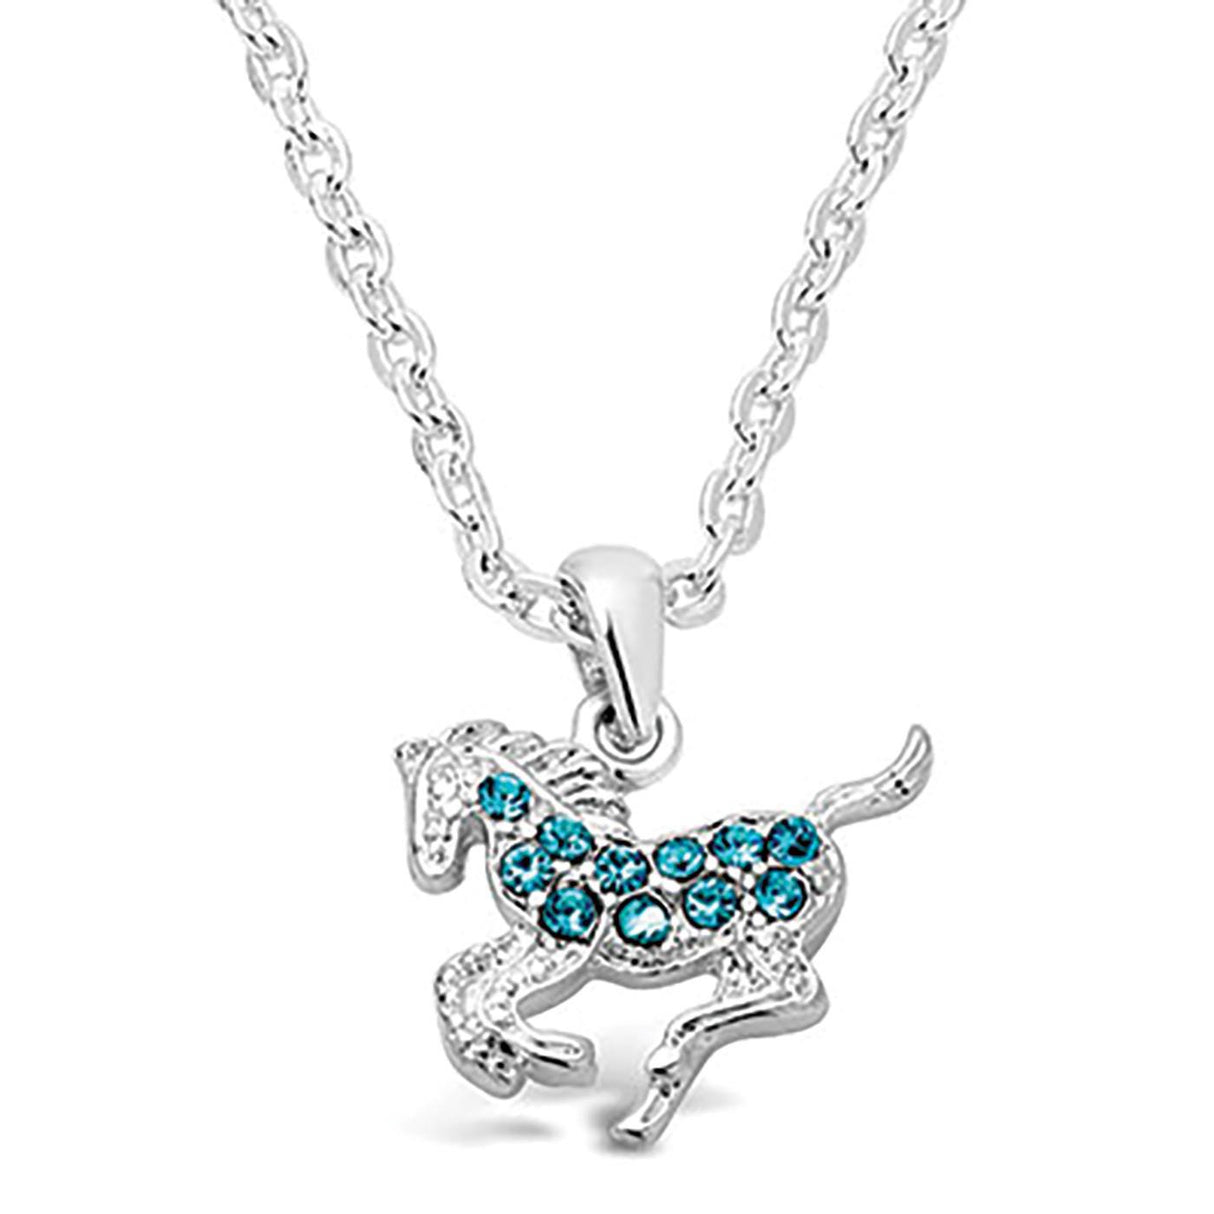 Kelley & Co Galloping Horse Necklace